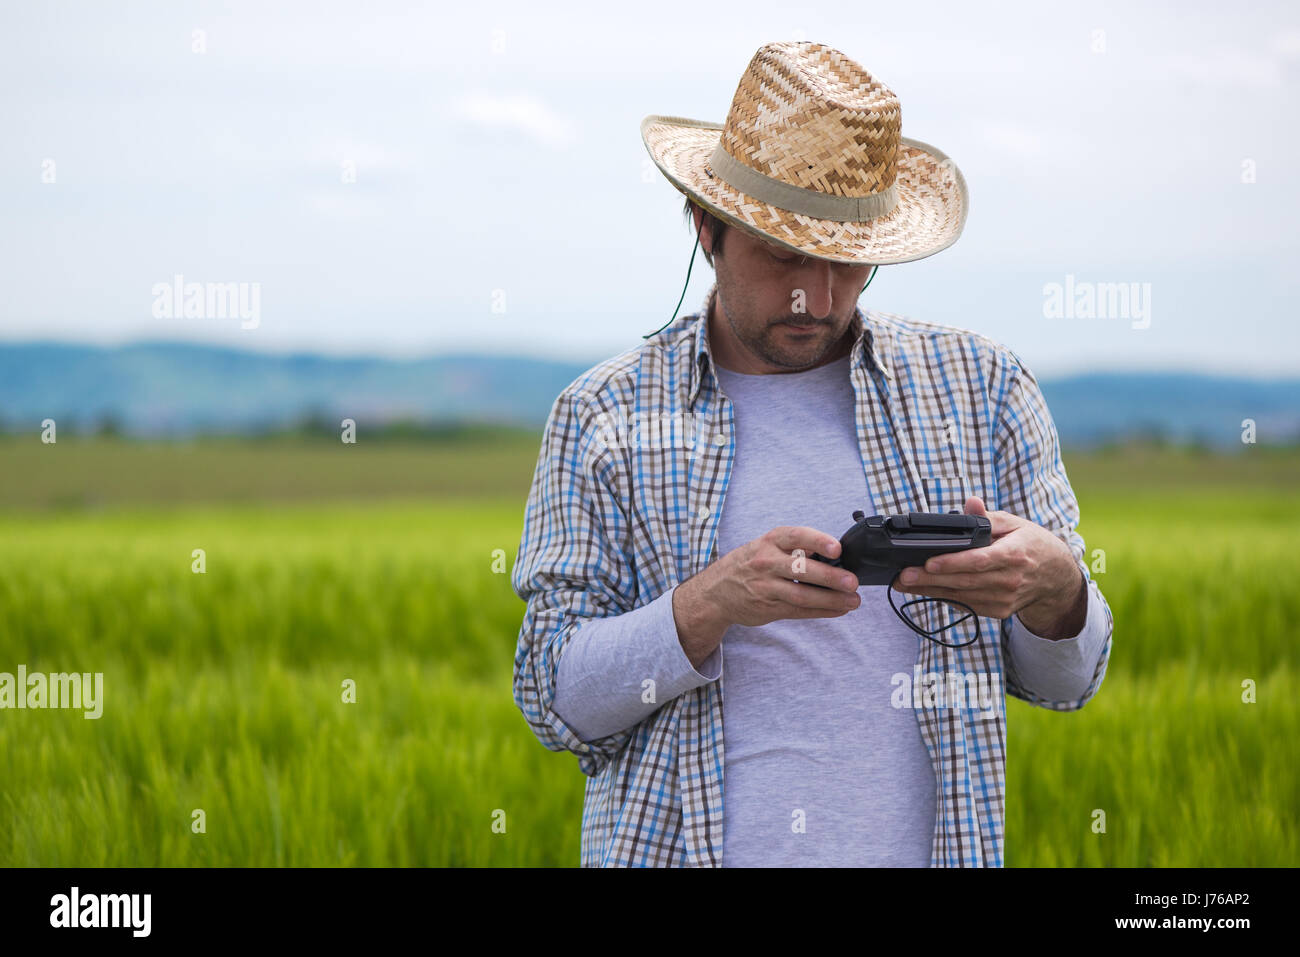 Smart farming concept, farmer using drone remote controller to navigate aircraft in cultivated field and examine crops Stock Photo